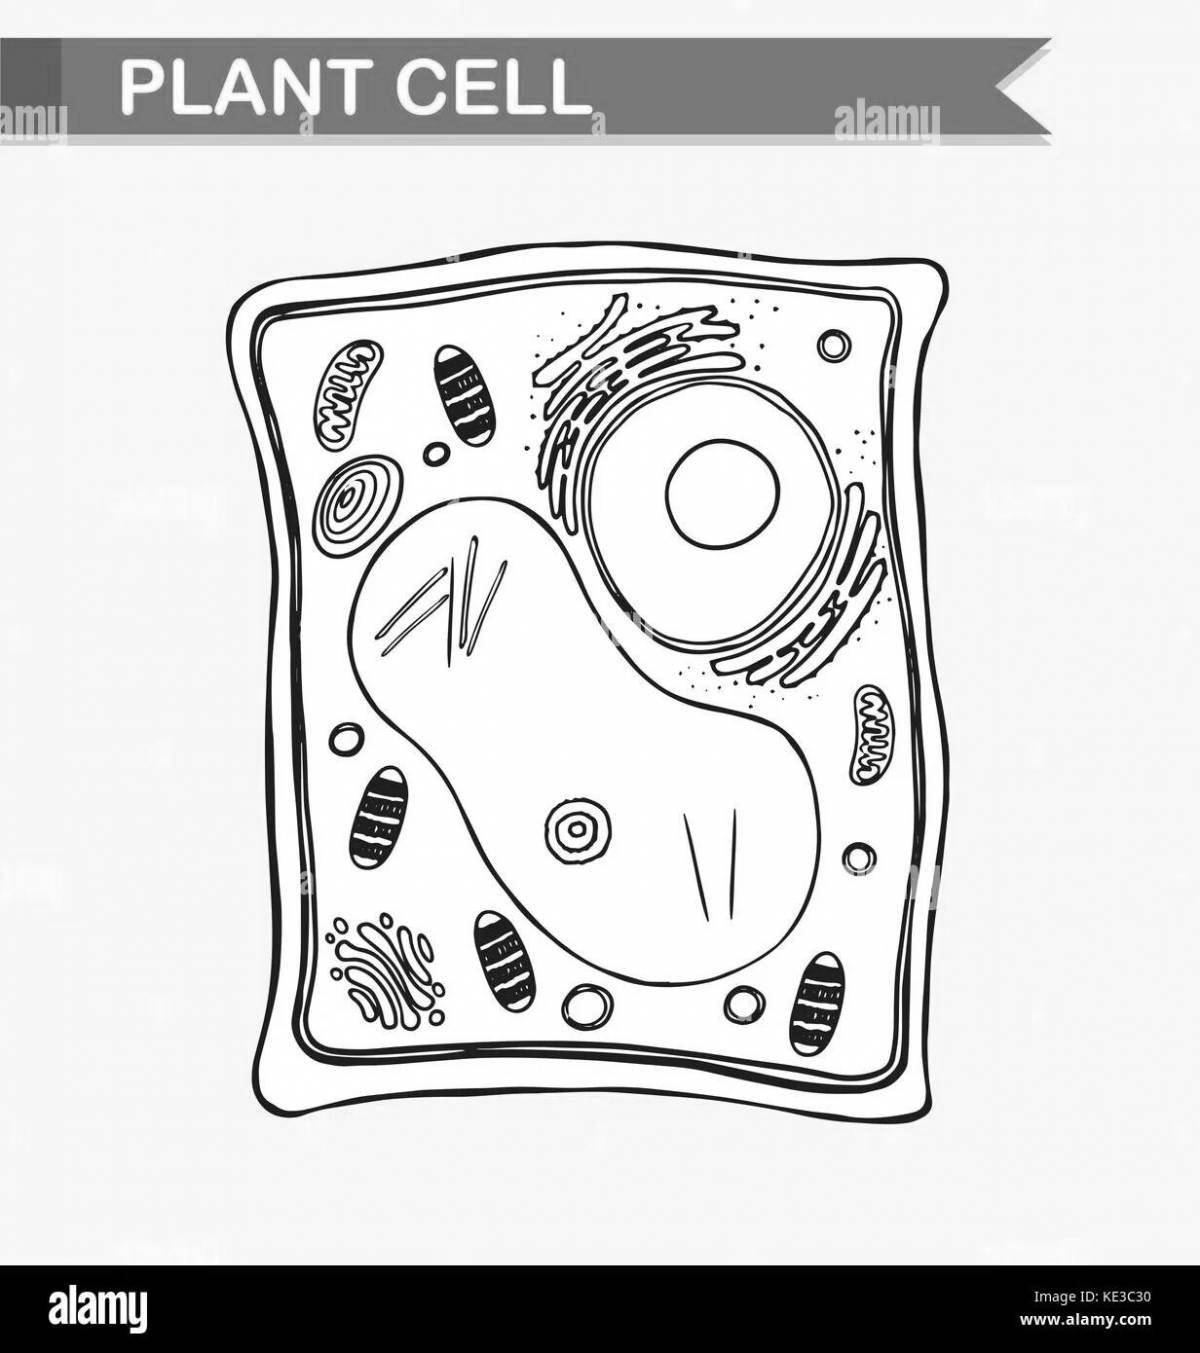 Attractive coloring of plant cells